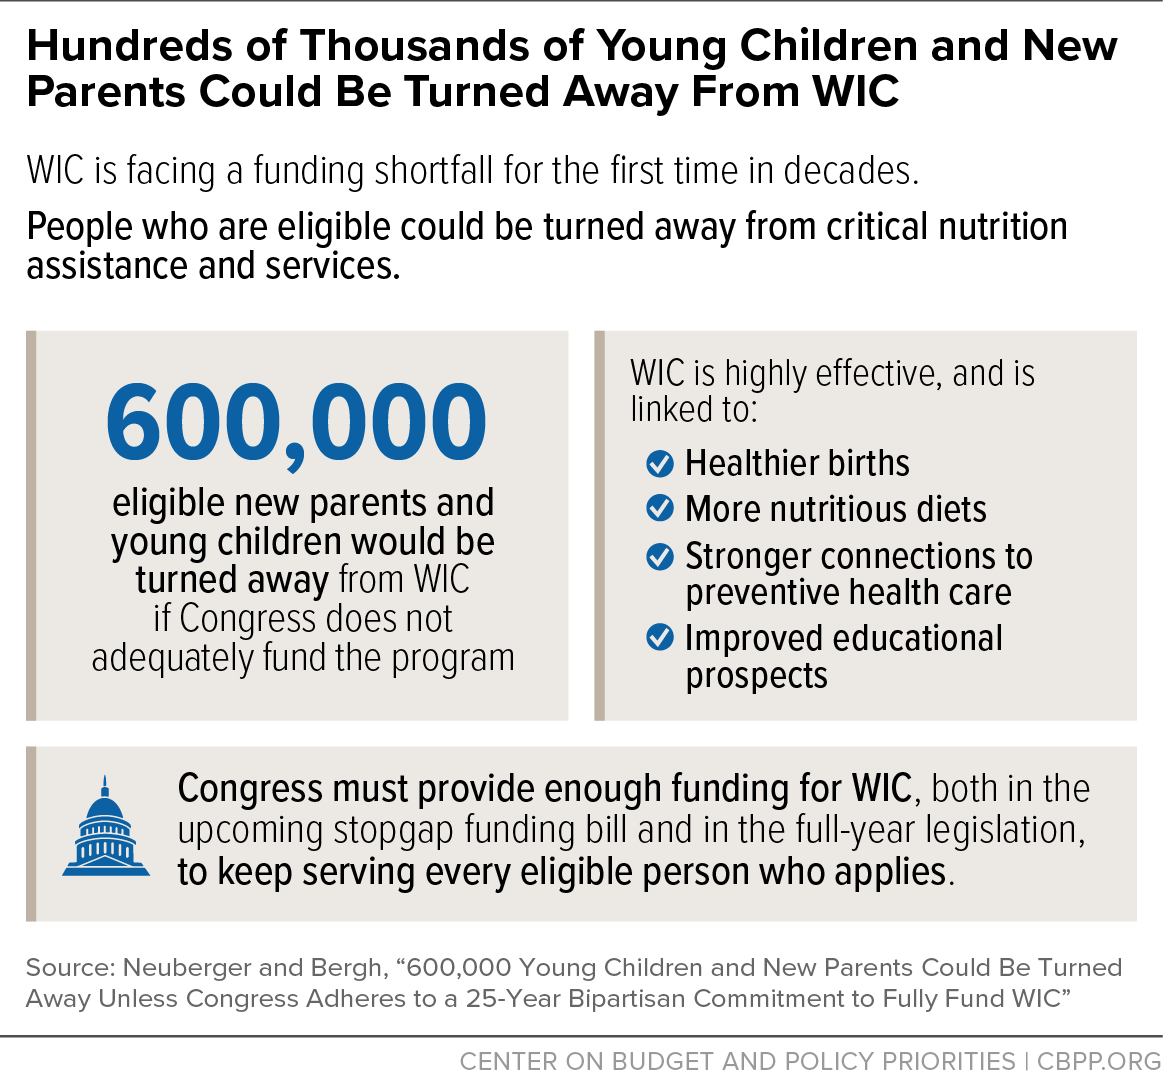 600,000 young children and new parents are at risk of losing critical nutrition and food assistance from #WIC unless Congress fixes its looming funding shortfall. cbpp.org/blog/young-chi…